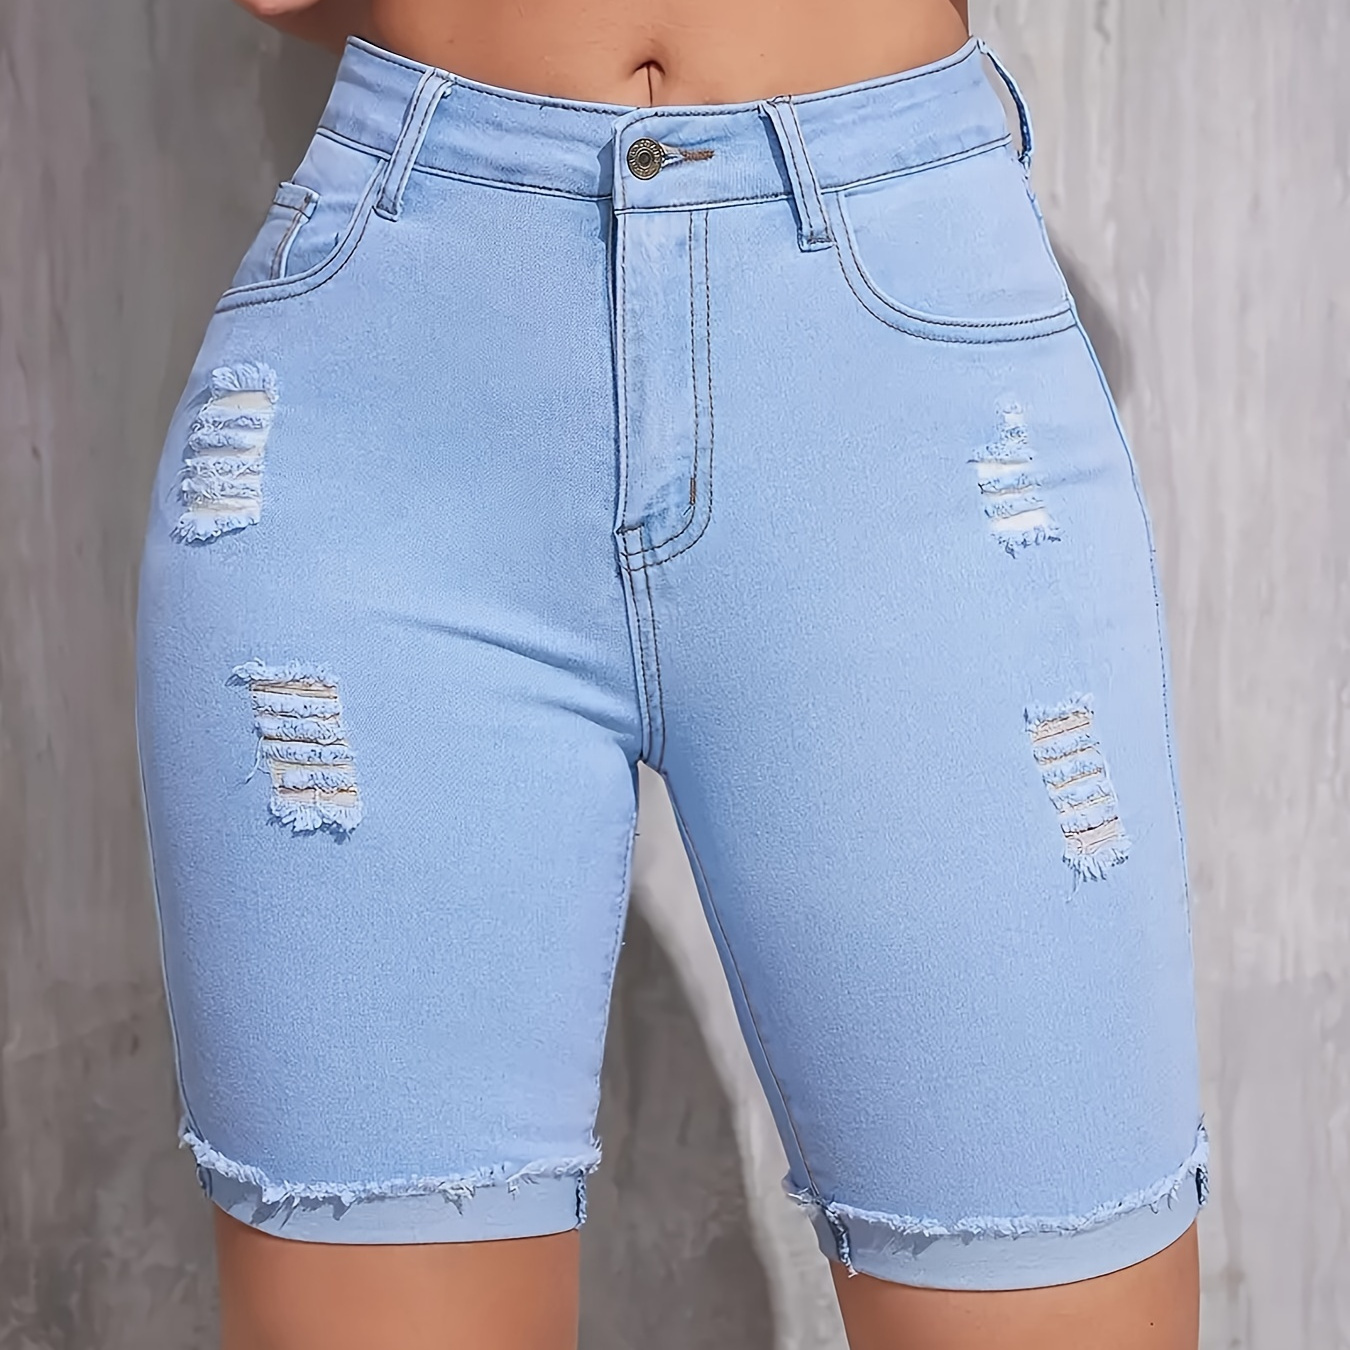 

Women's Fashionable High-waisted Stretchy Bermuda Denim Cycling Shorts, Elegant Style, Comfort Fit, Distressed Detailing, Summer Essential - Light Blue